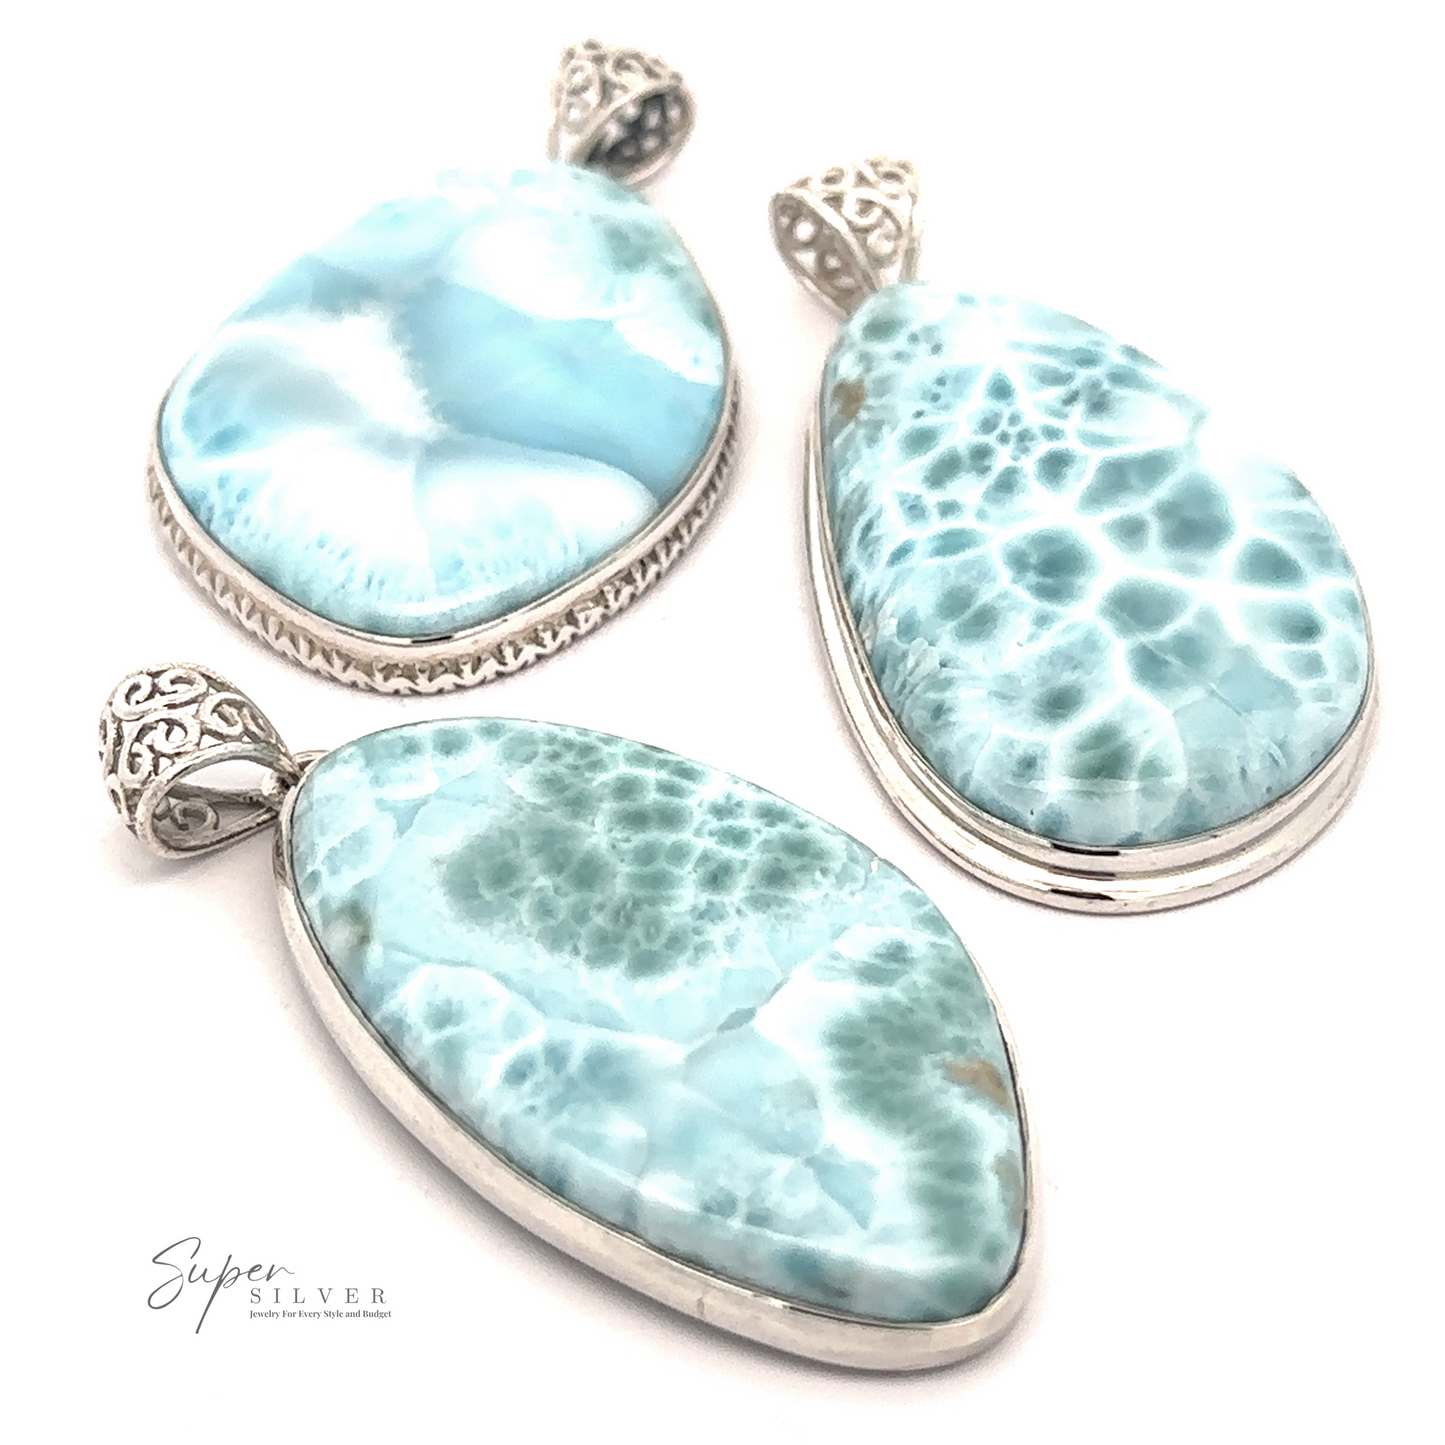 
                  
                    Three Freeform Large Larimar Pendants with intricate sterling silver settings are displayed against a white background. The stones vary in shape, including oval, teardrop, and freeform Larimar designs.
                  
                